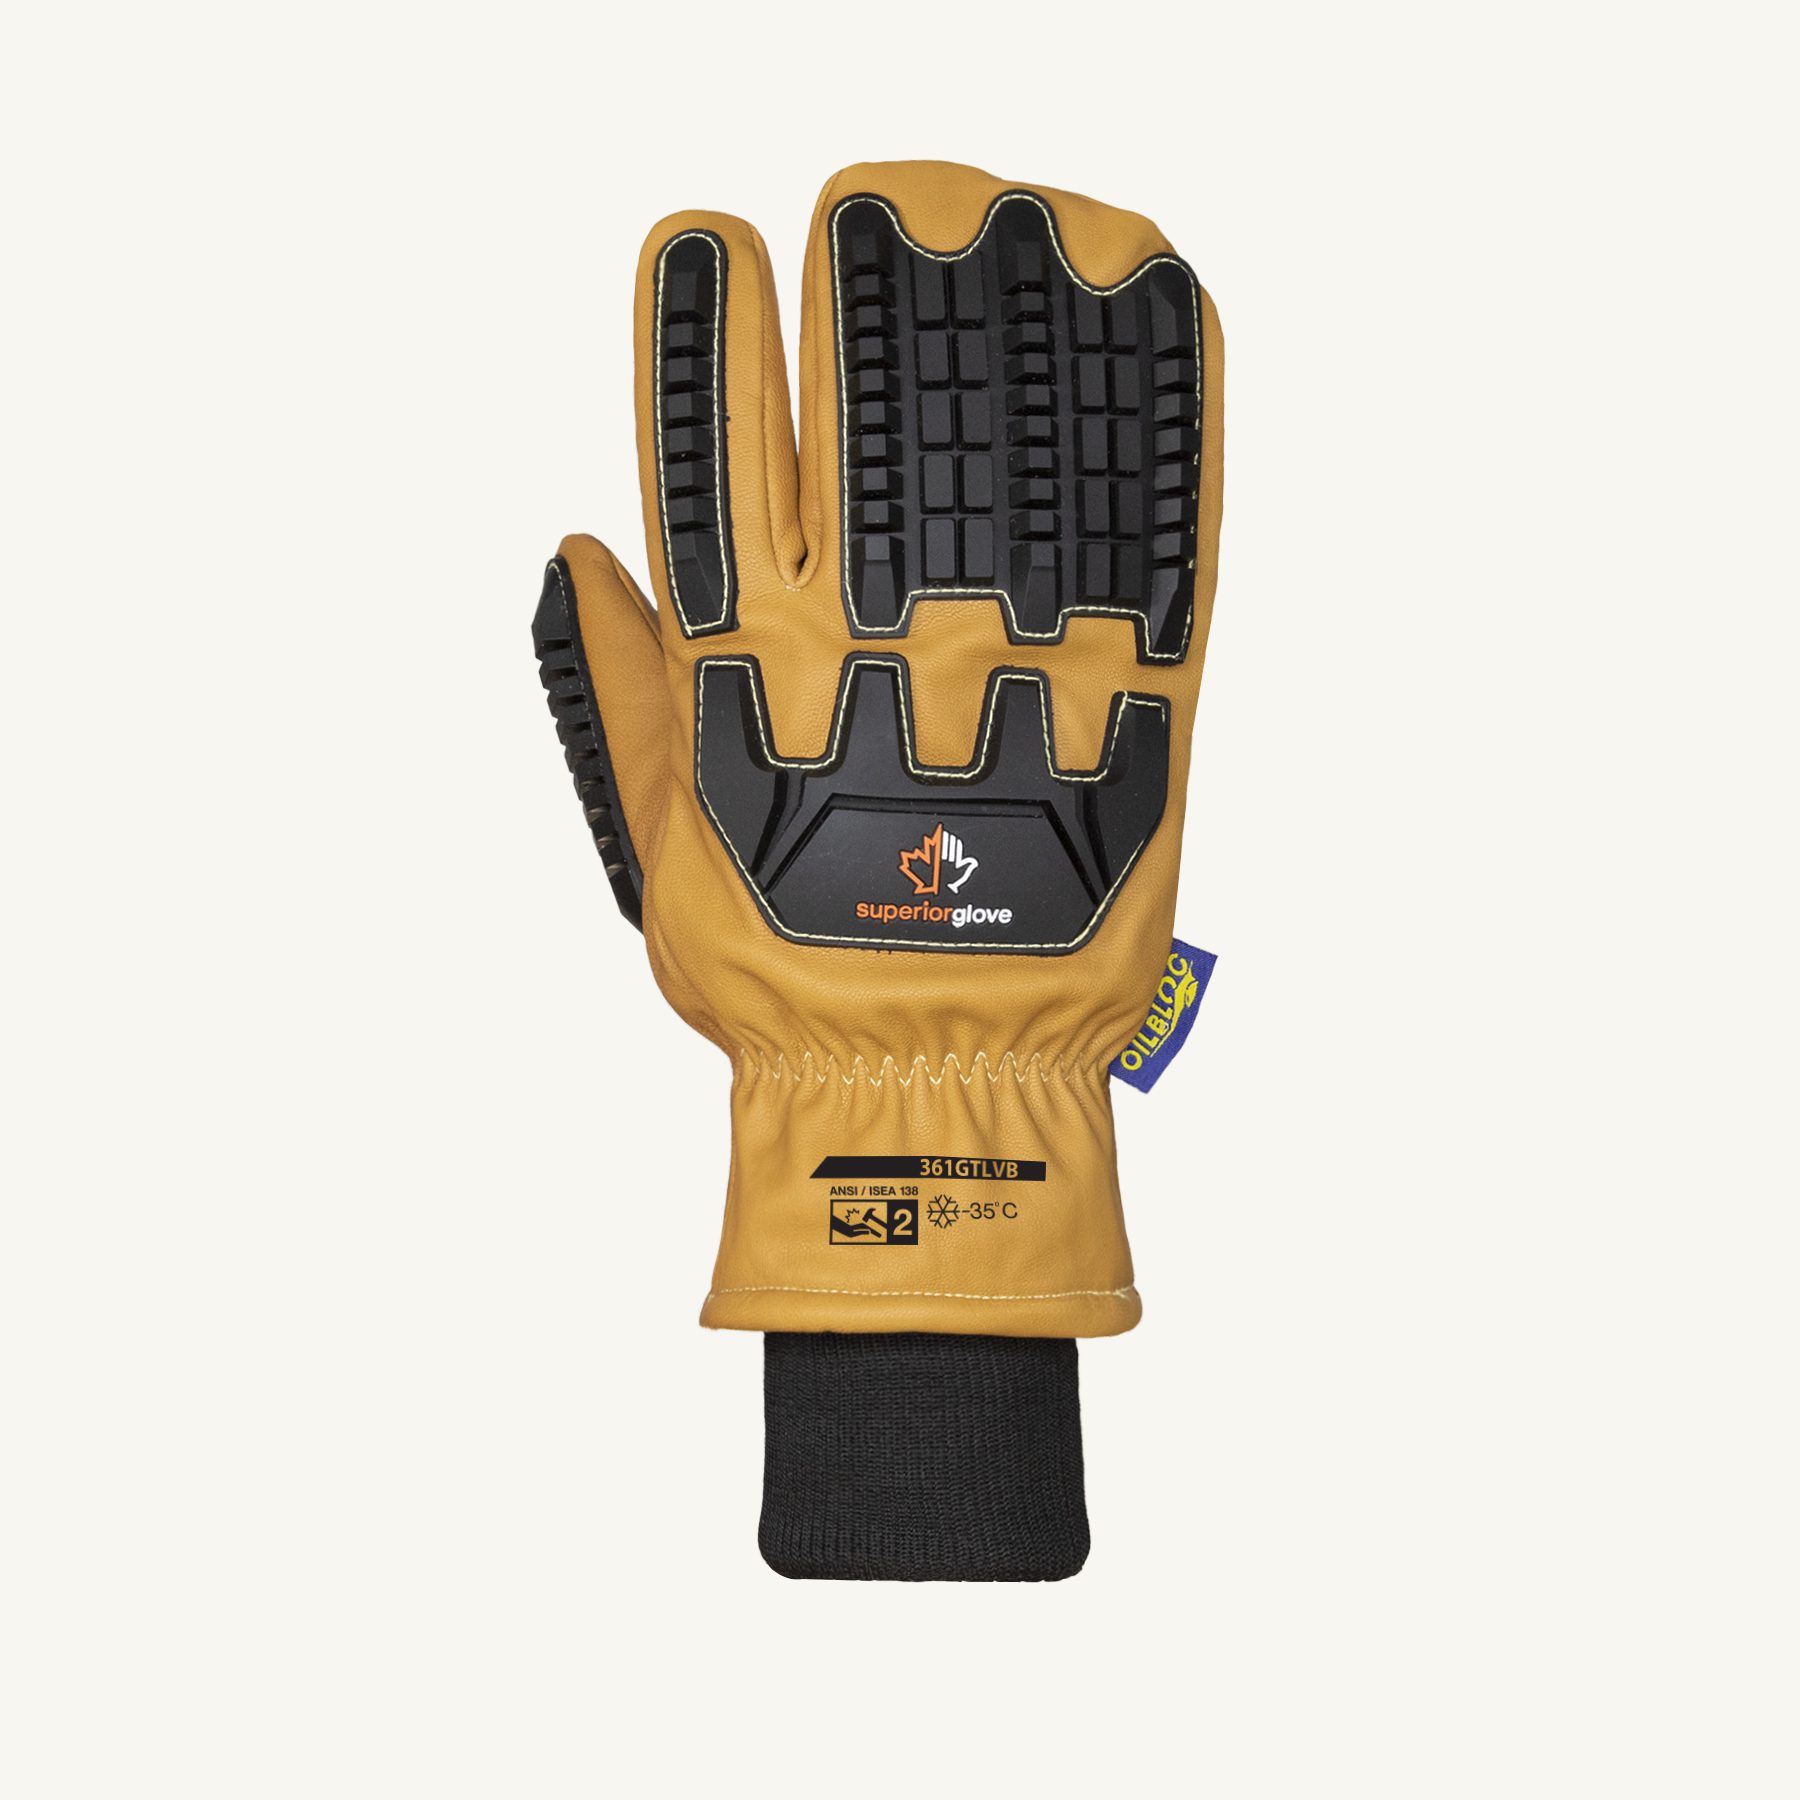 Superior Glove® 361GTLVB Endura® Impact-Resistant Thinsulate Lined Leather Winter Mitts